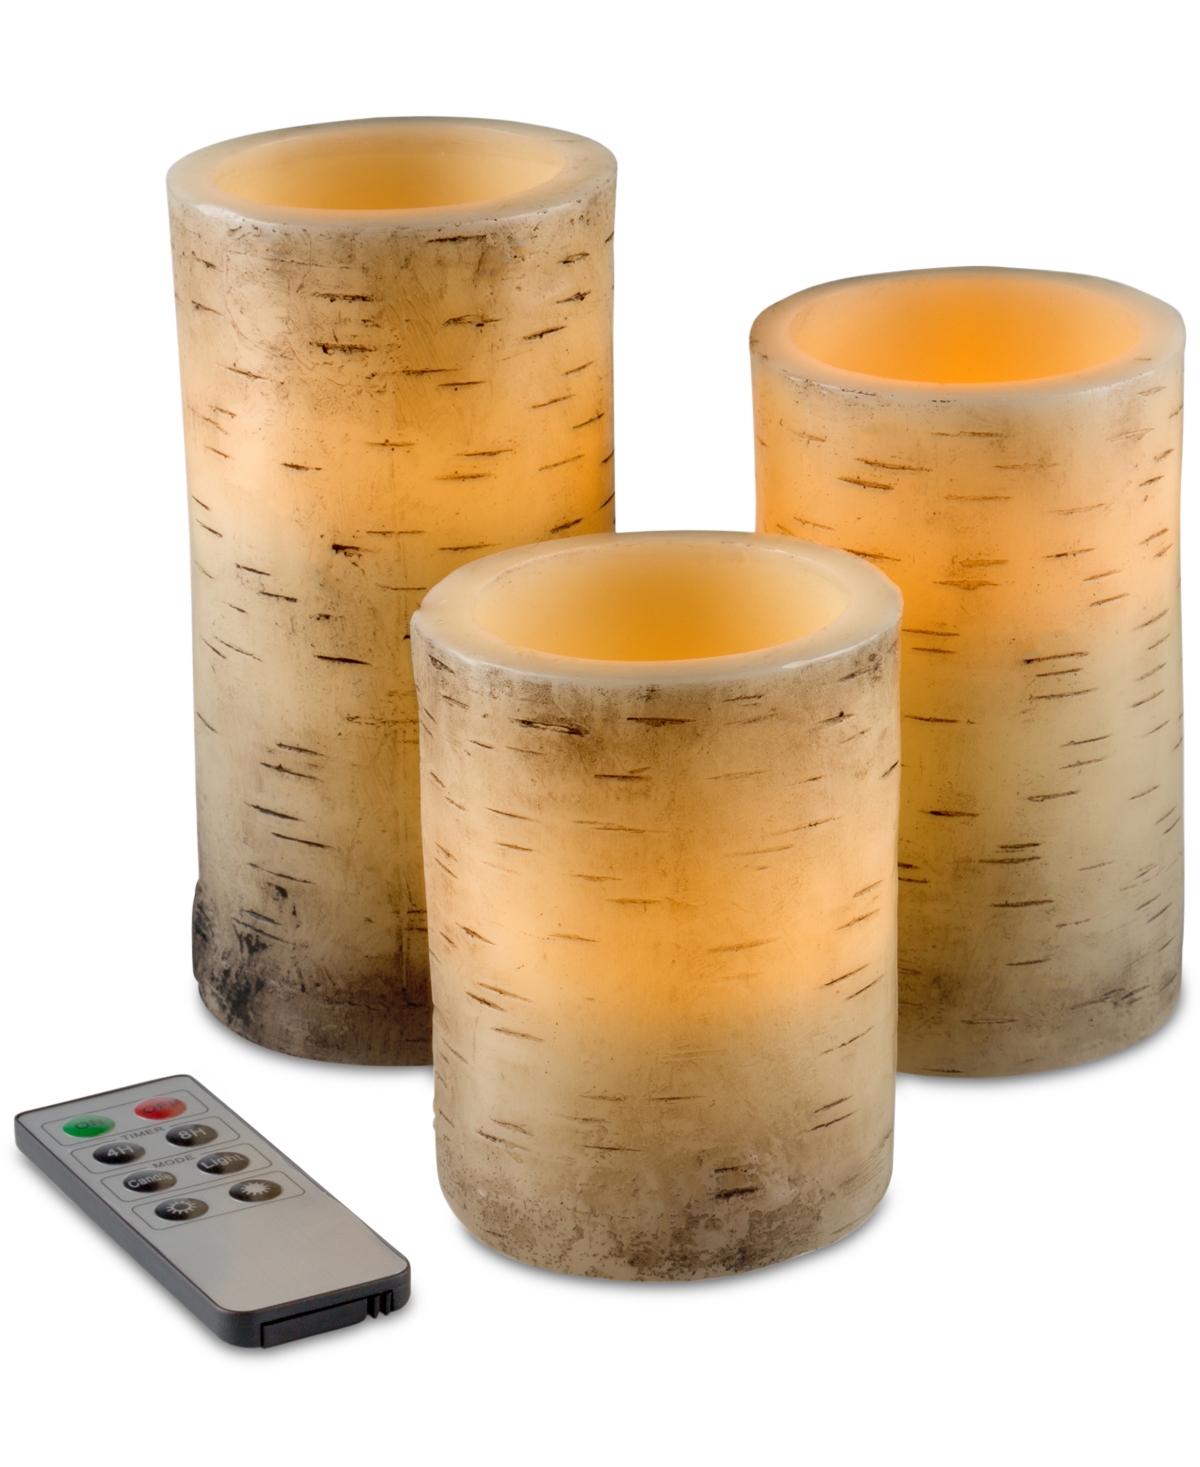 4-Pc. Flickering Flameless Led Candles & Remote Control Set - Yellow